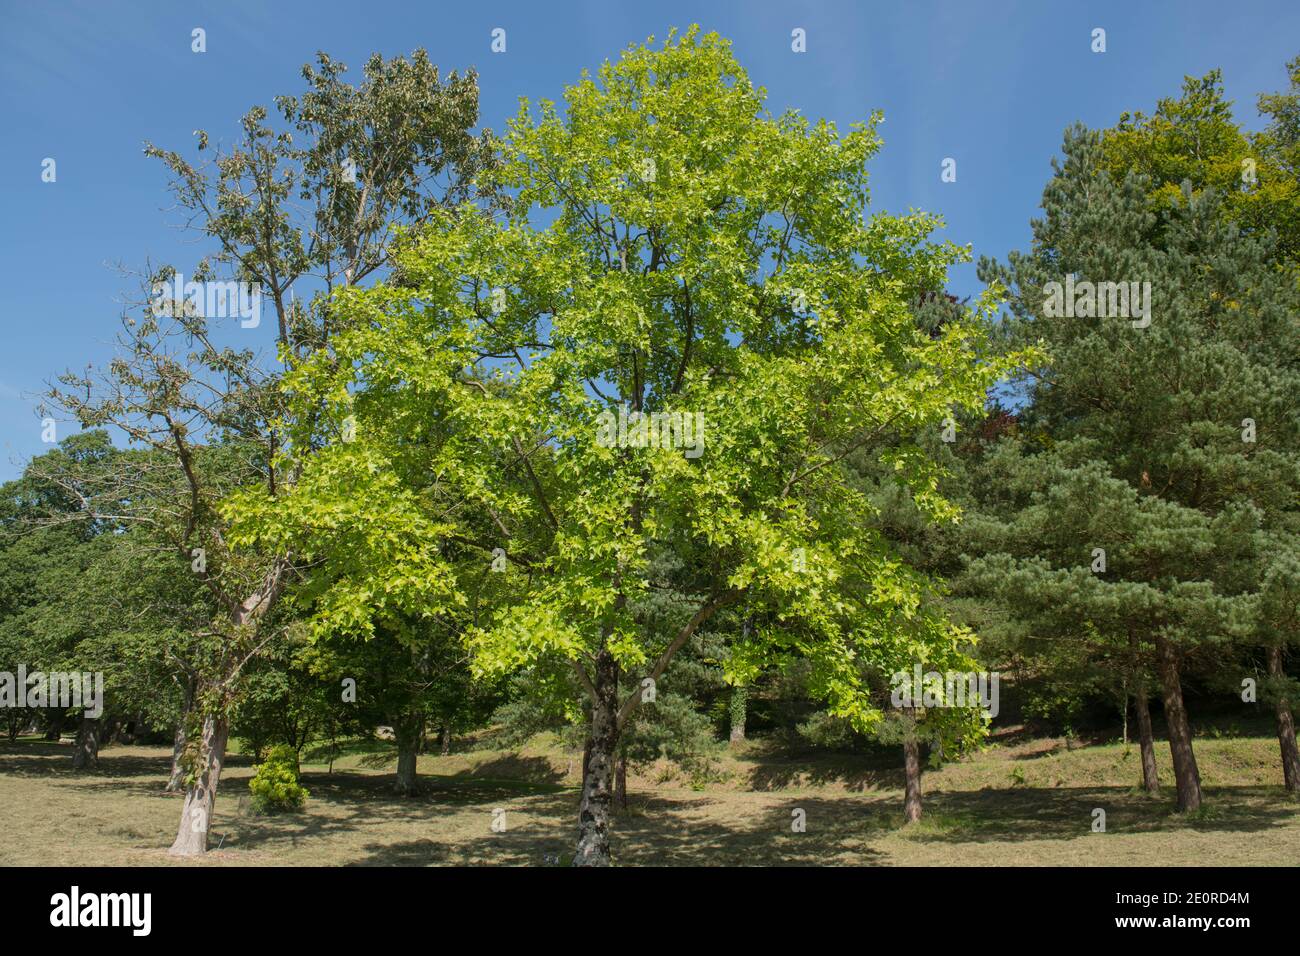 Summer Foliage of a Deciduous Chinese Tulip Tree (Liriodendron chinense) Growing in a Garden with a Bright Blue Sky Background in Rural Devon Stock Photo